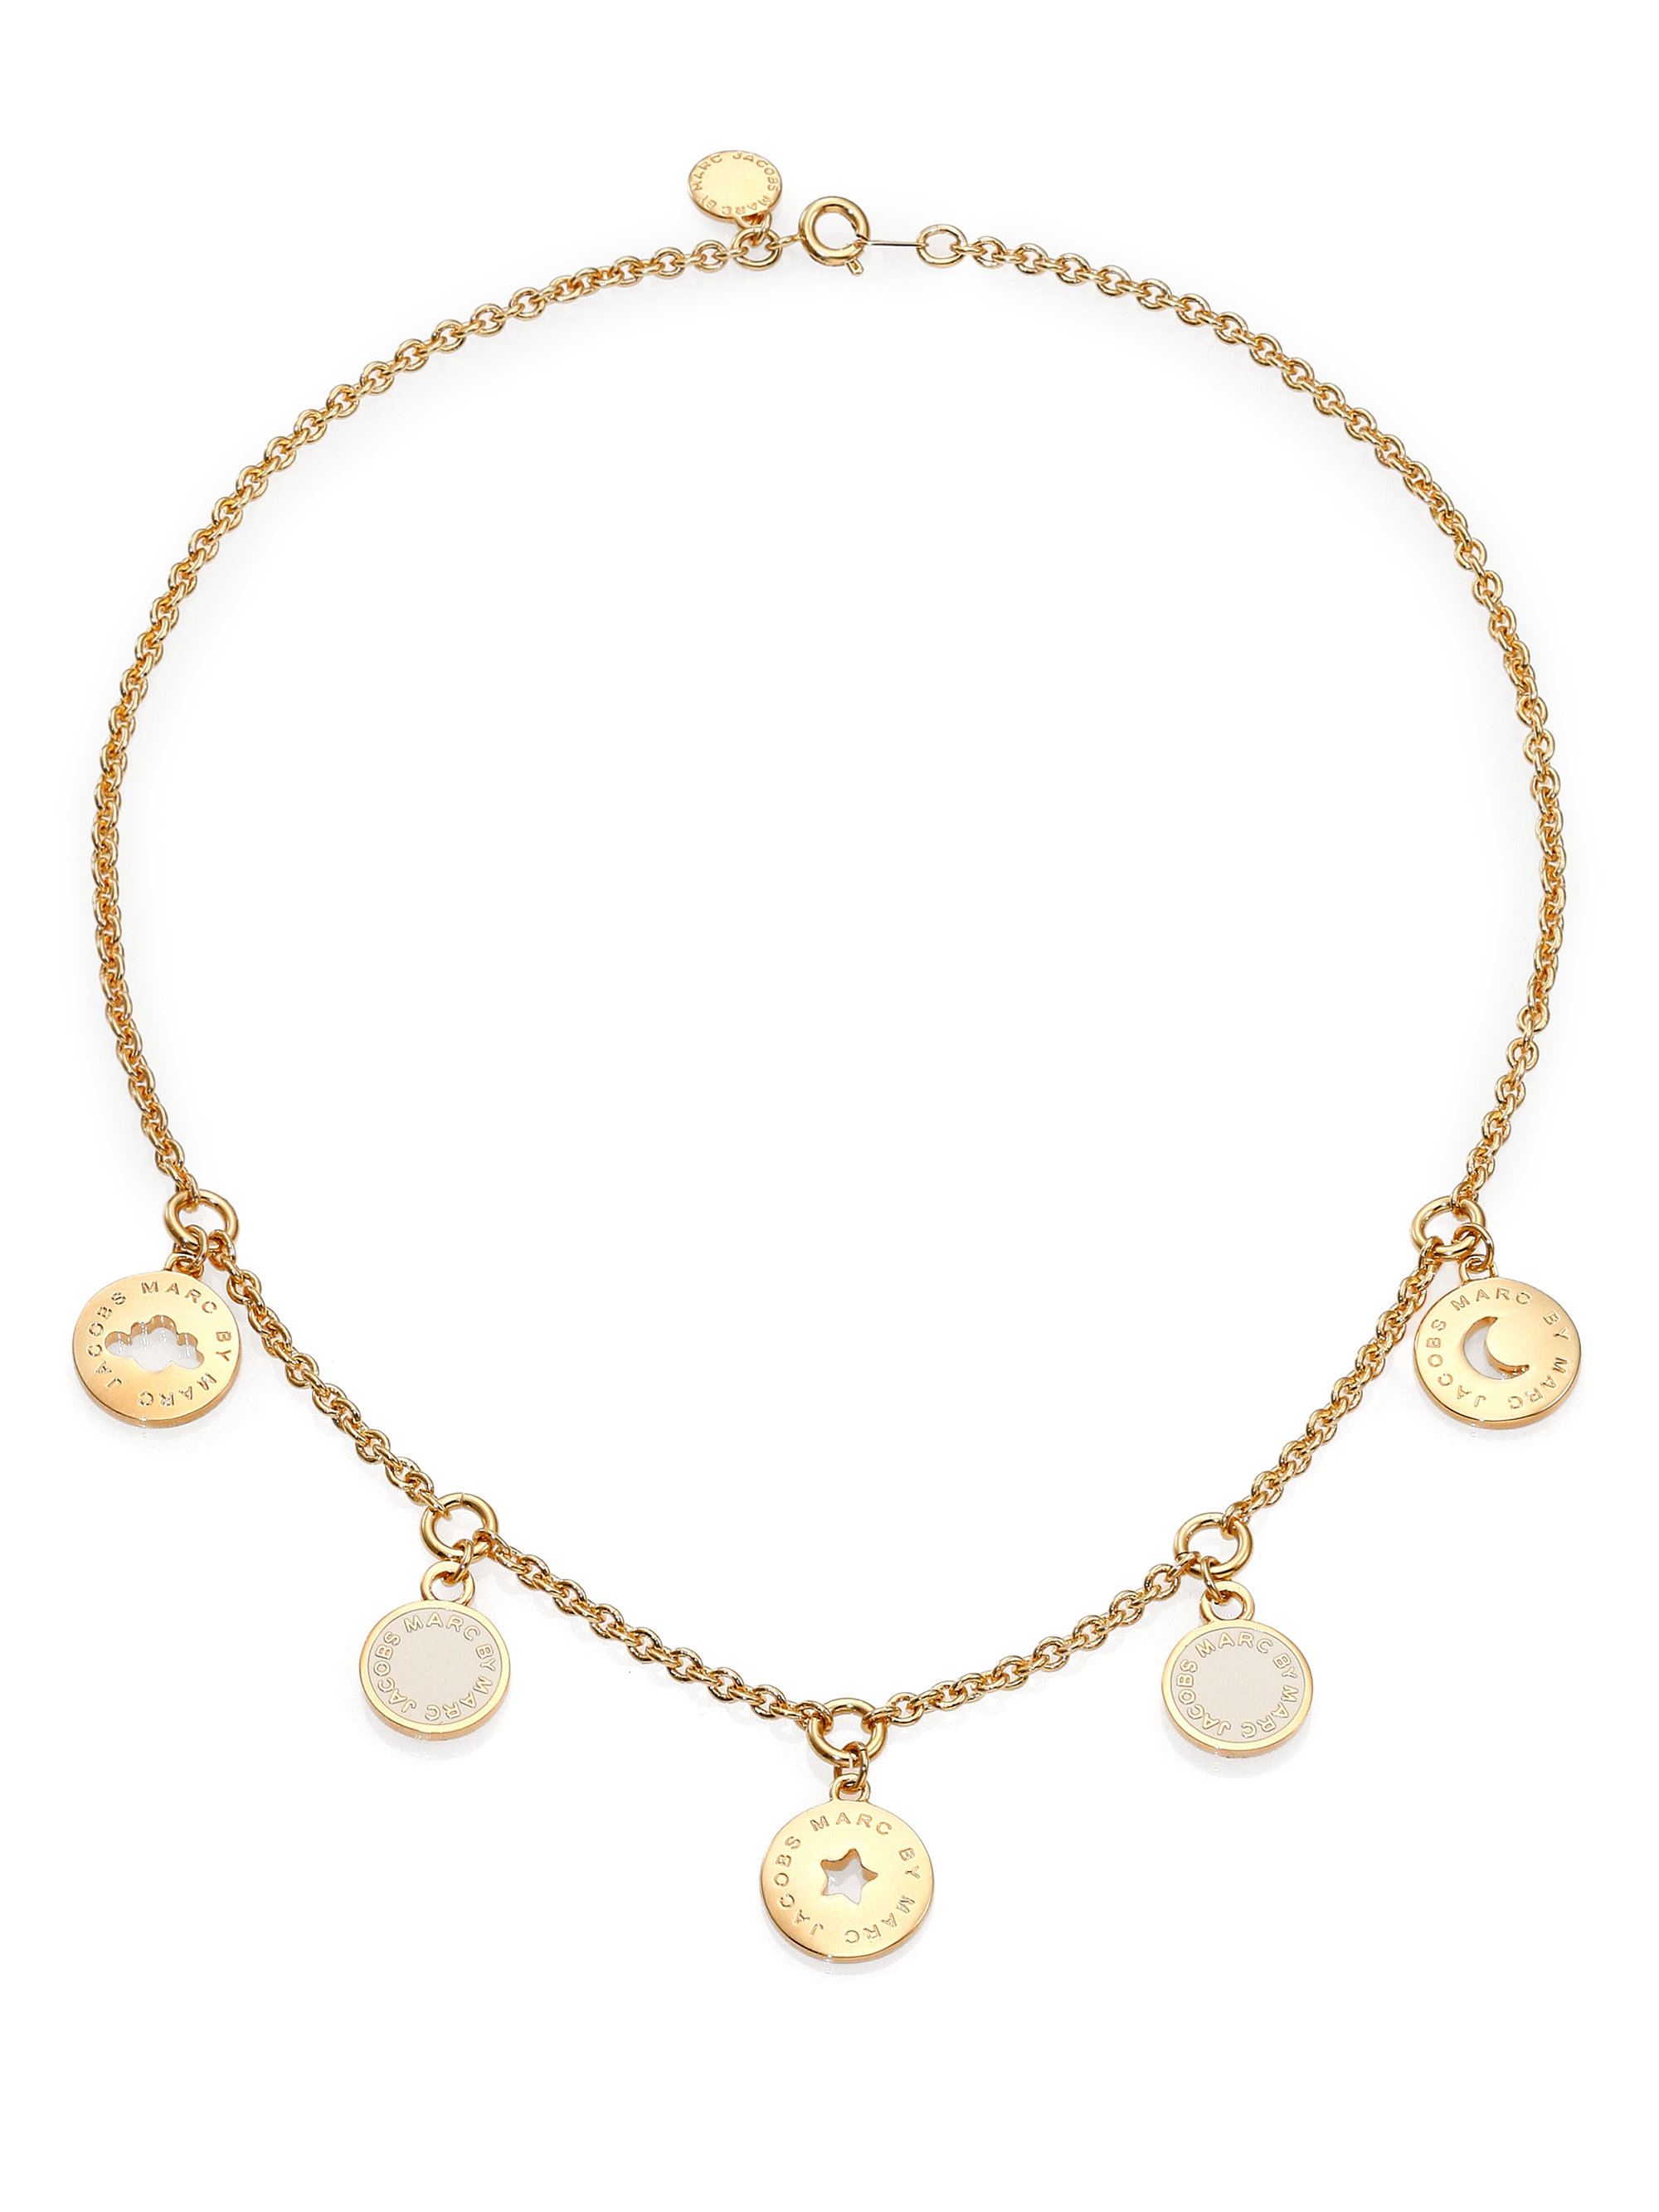 Lyst - Marc By Marc Jacobs Cosmic Coins Necklace in Metallic